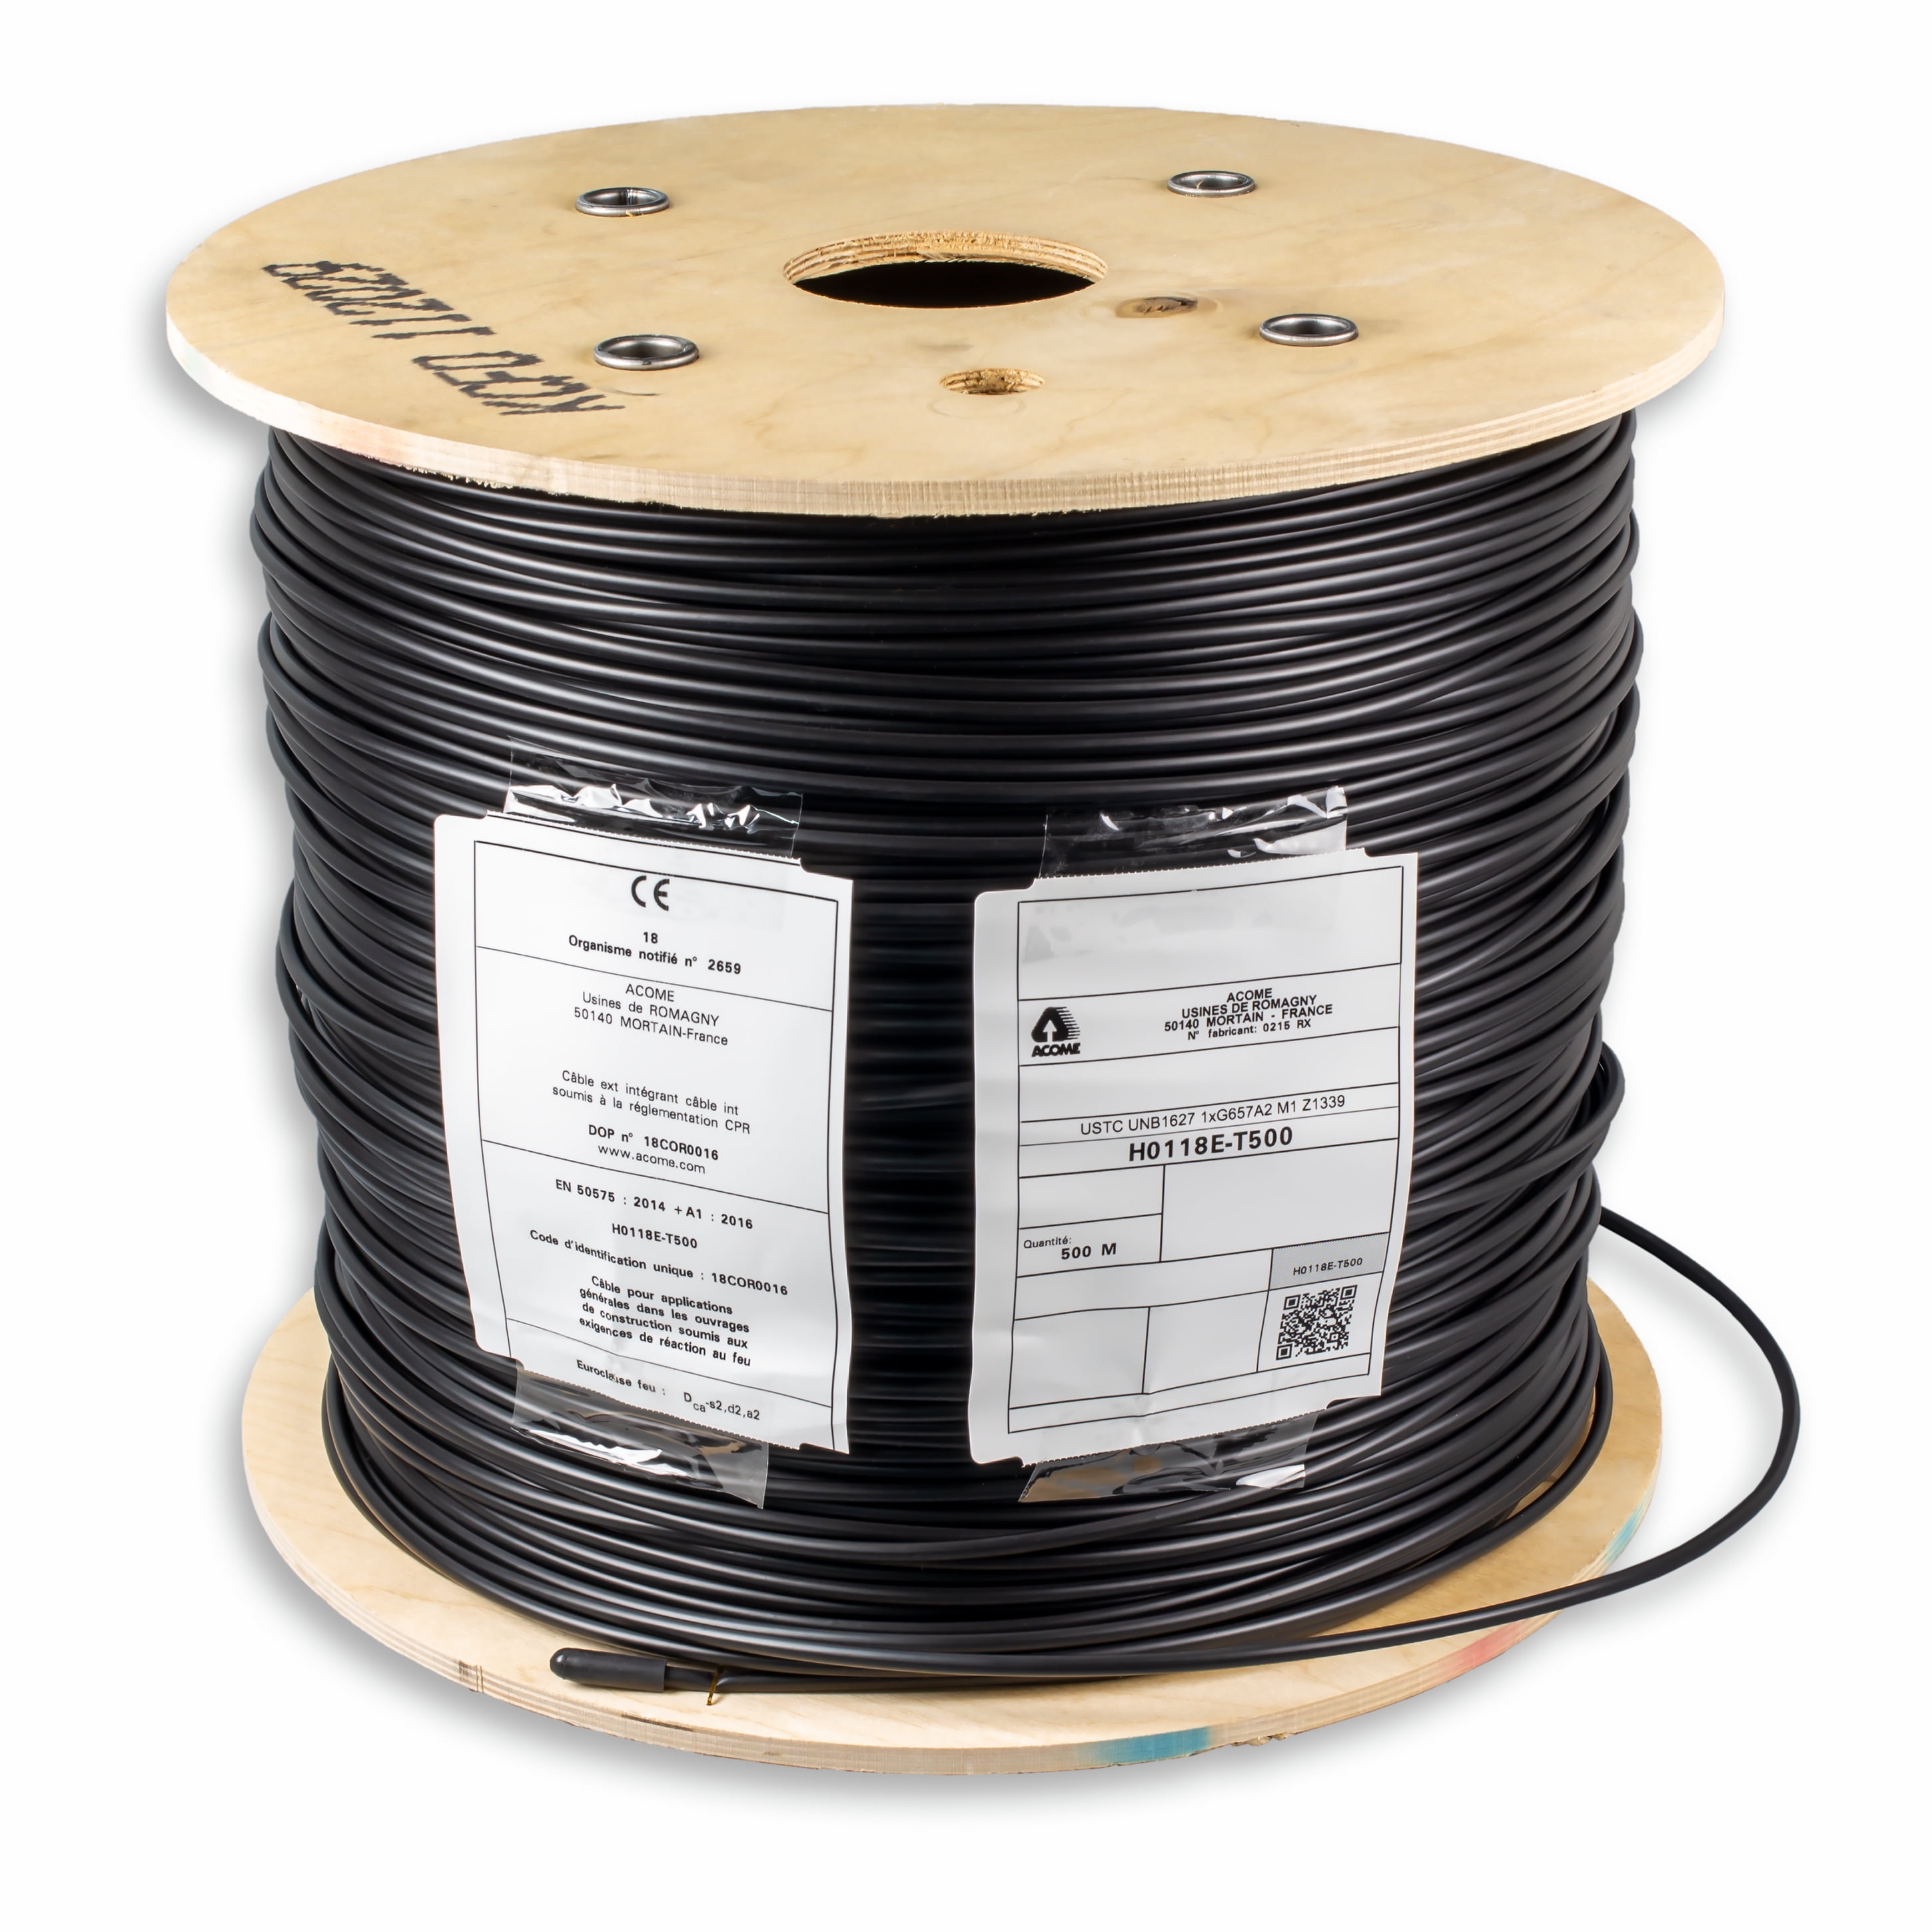 Acome Acoptic UNB1627 Indoor/Outdoor Strippable Overhead/Underground Fiber  Optic Drop Black Cable 500m/1640ft 